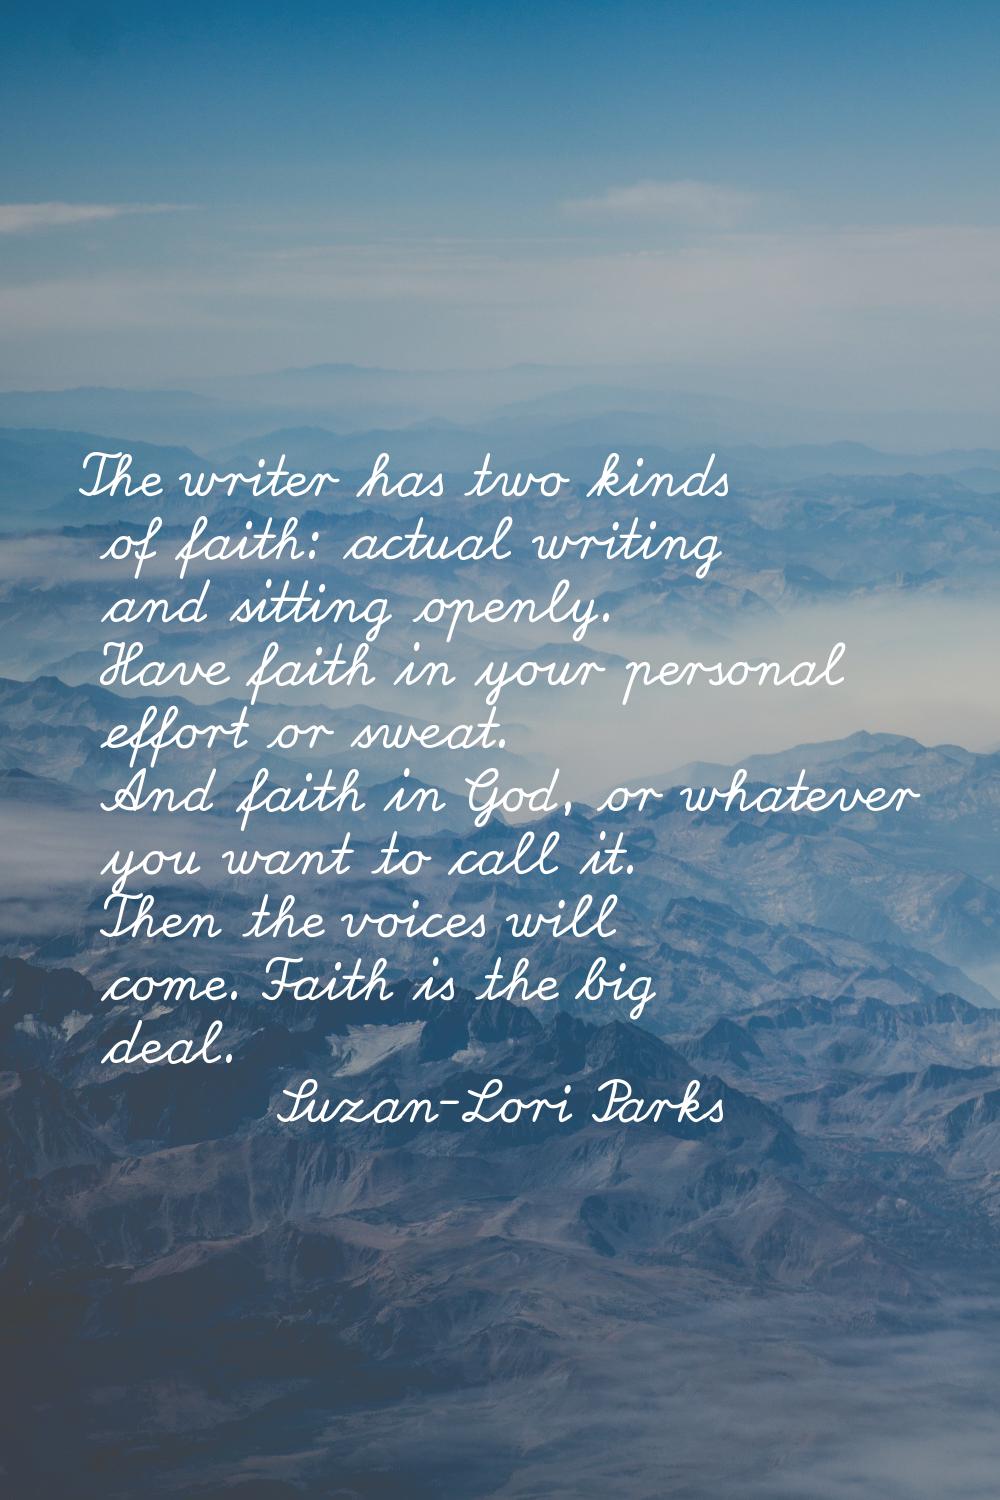 The writer has two kinds of faith: actual writing and sitting openly. Have faith in your personal e